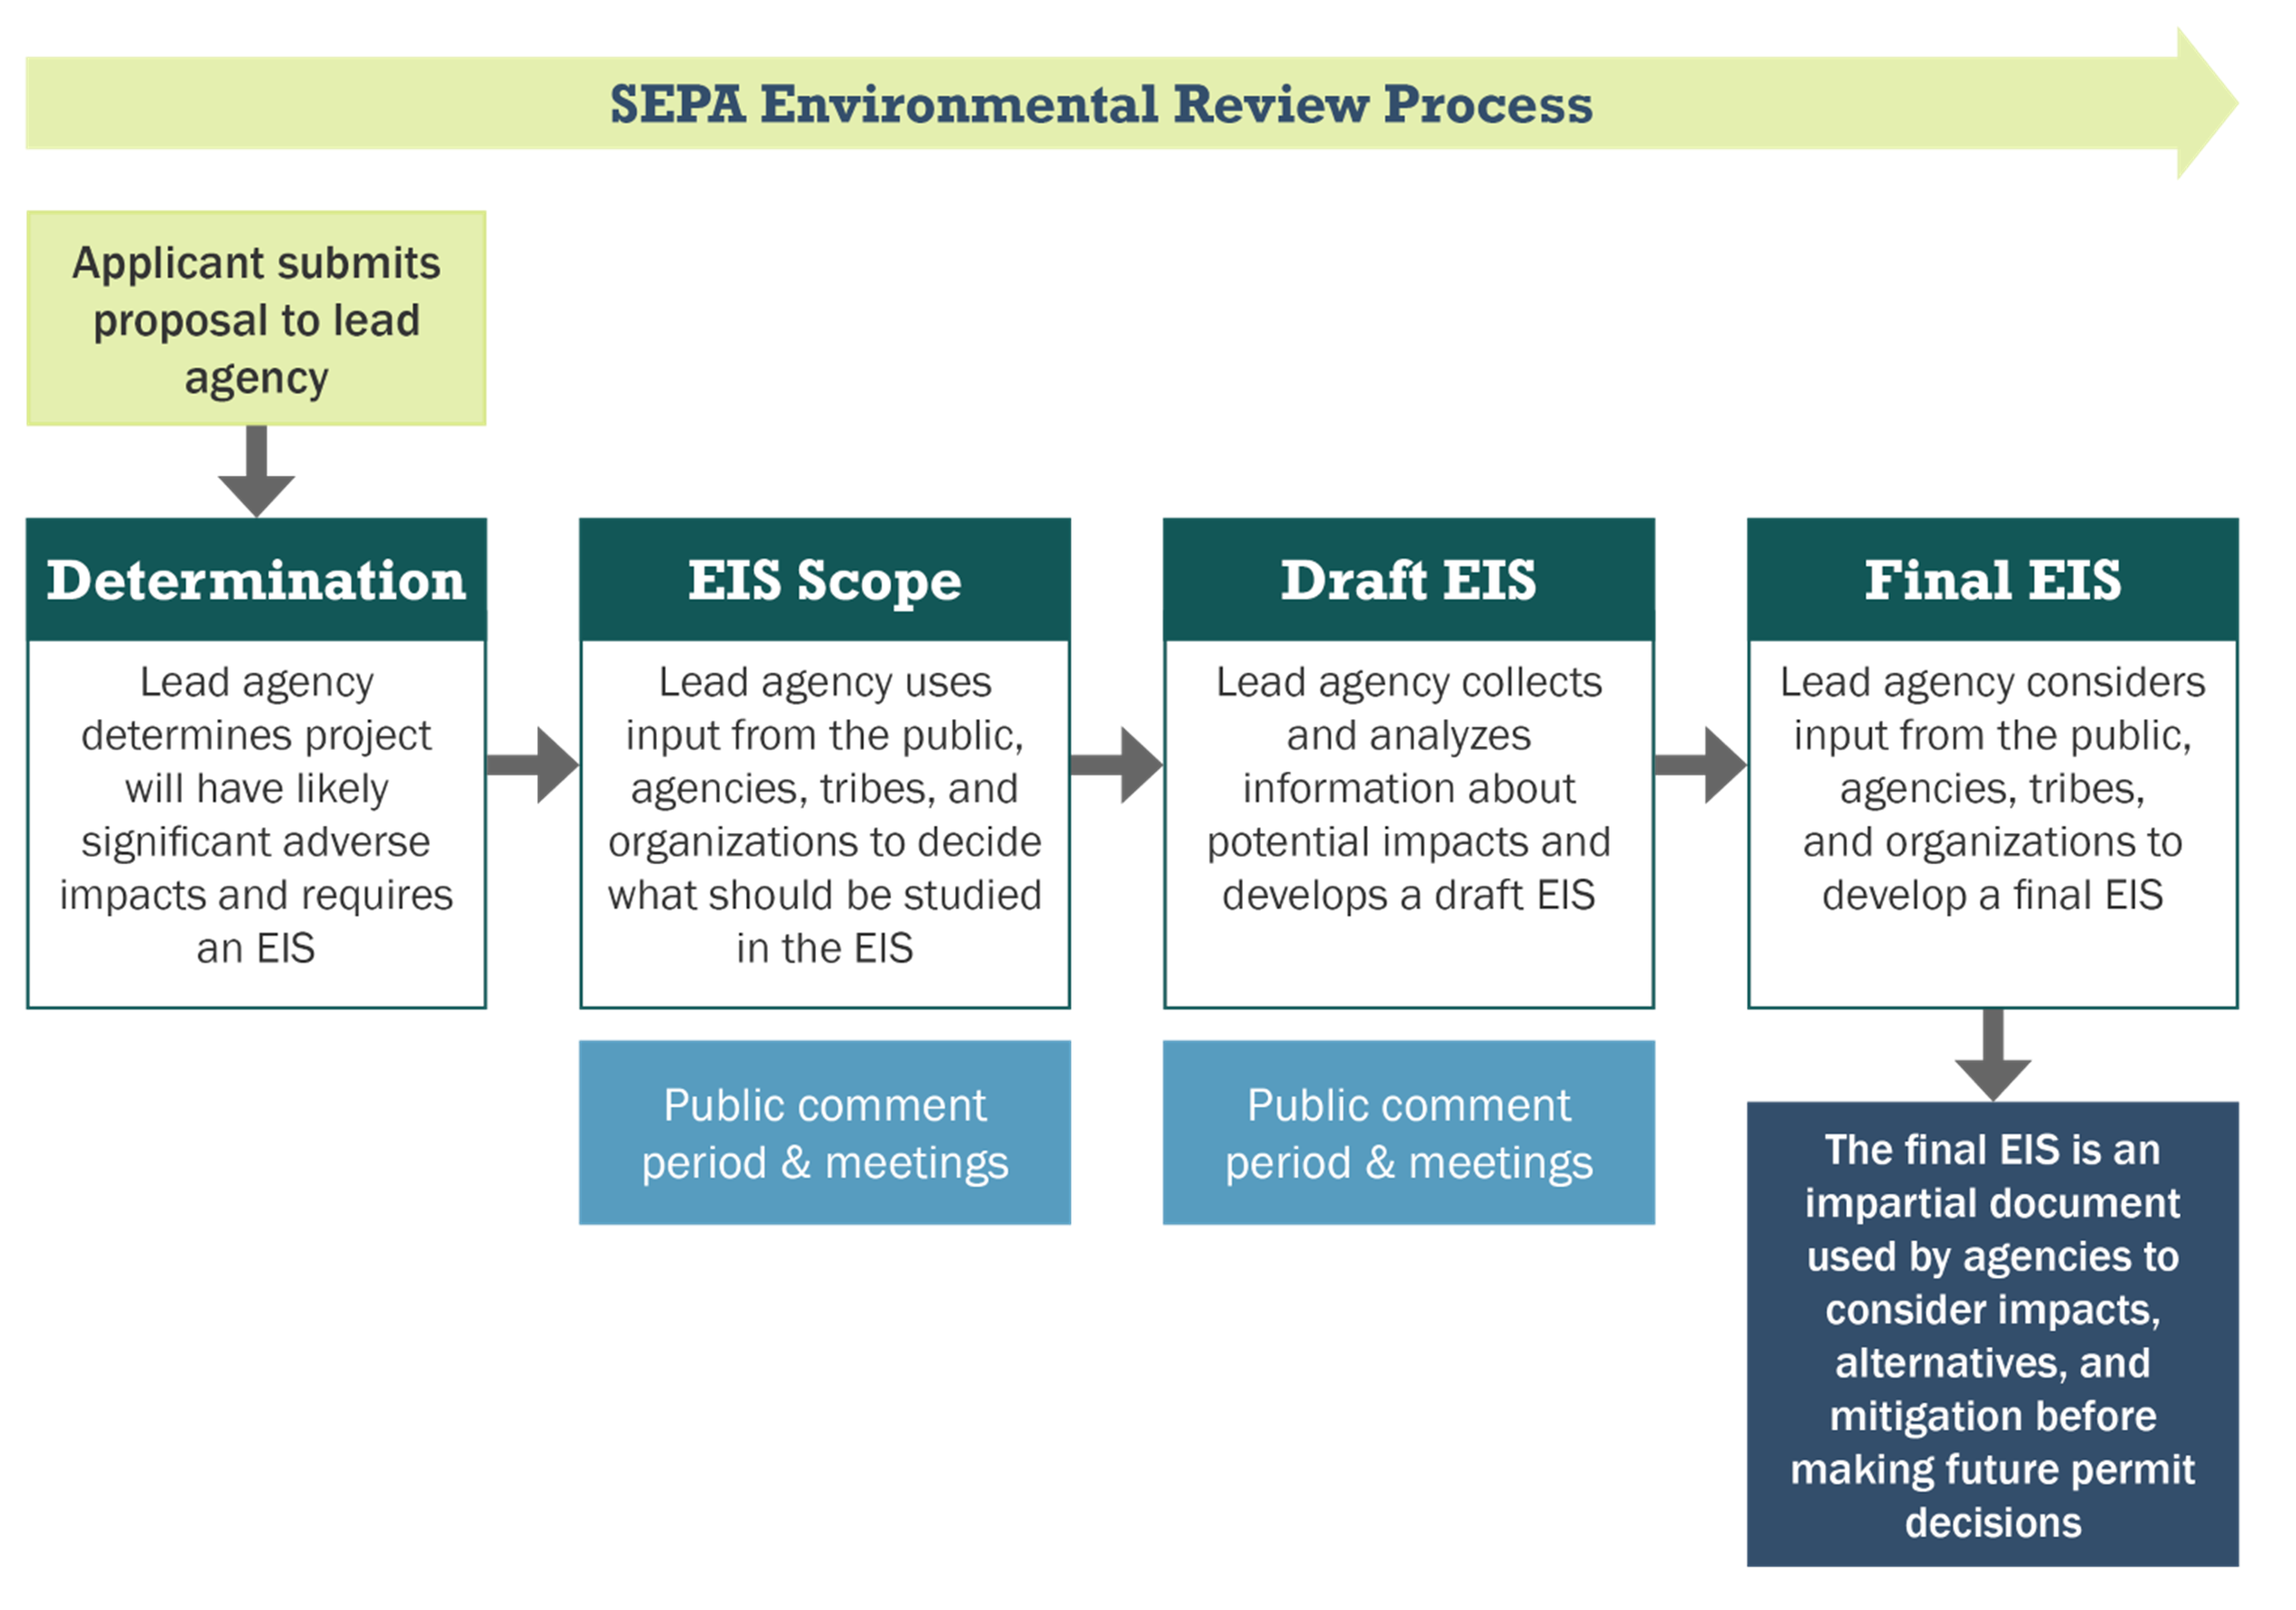 SEPA process. Click to read an accessible version of this image.